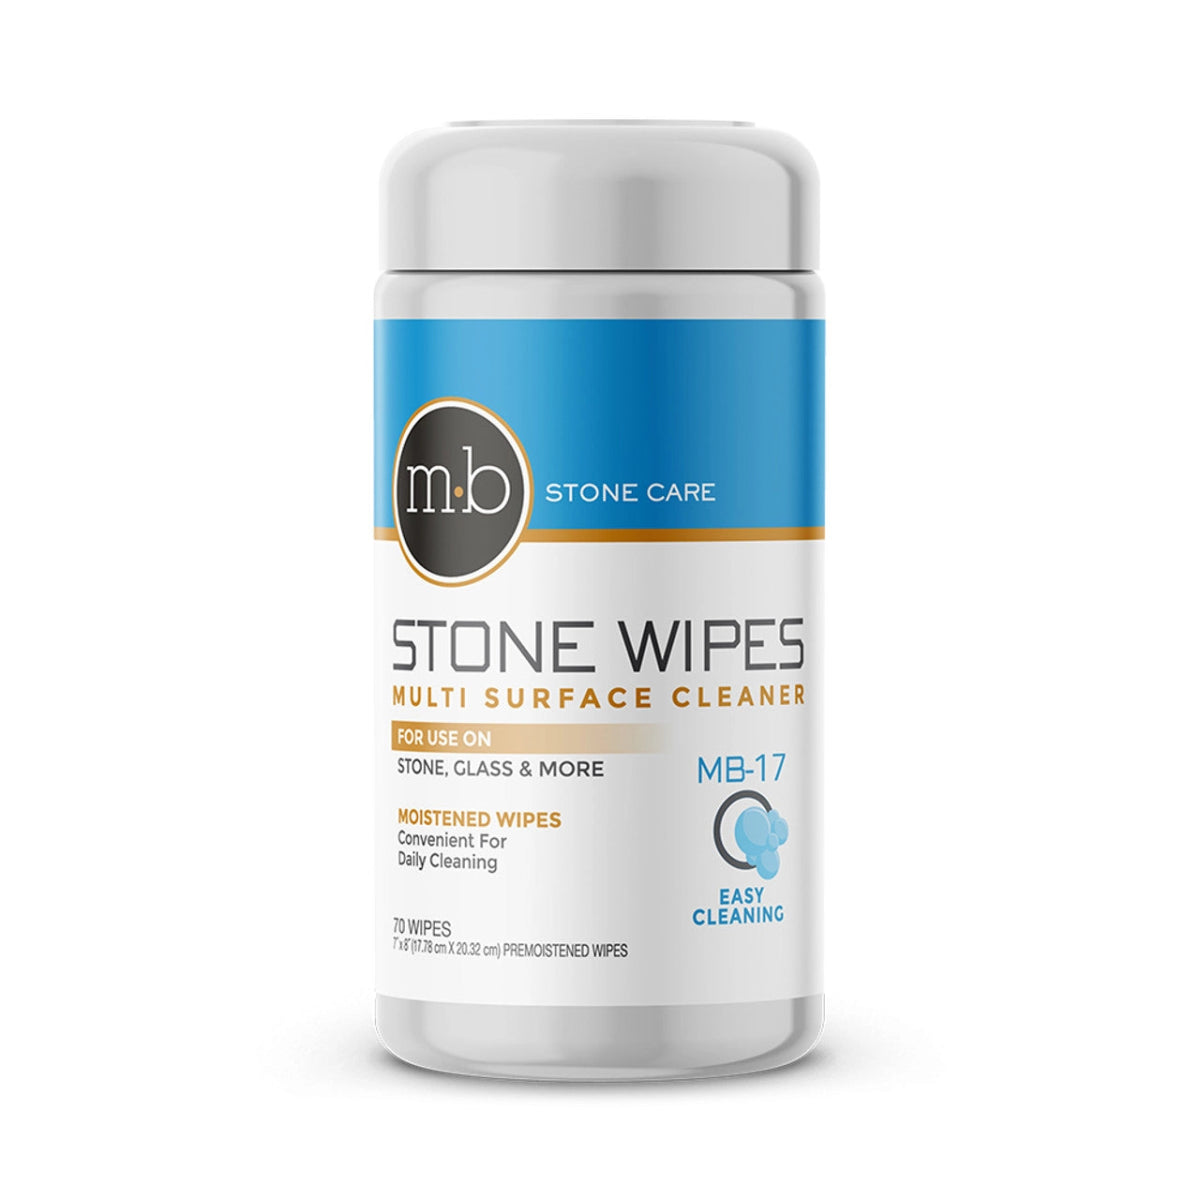 MB-17 Stone Wipes - MB Stone Care